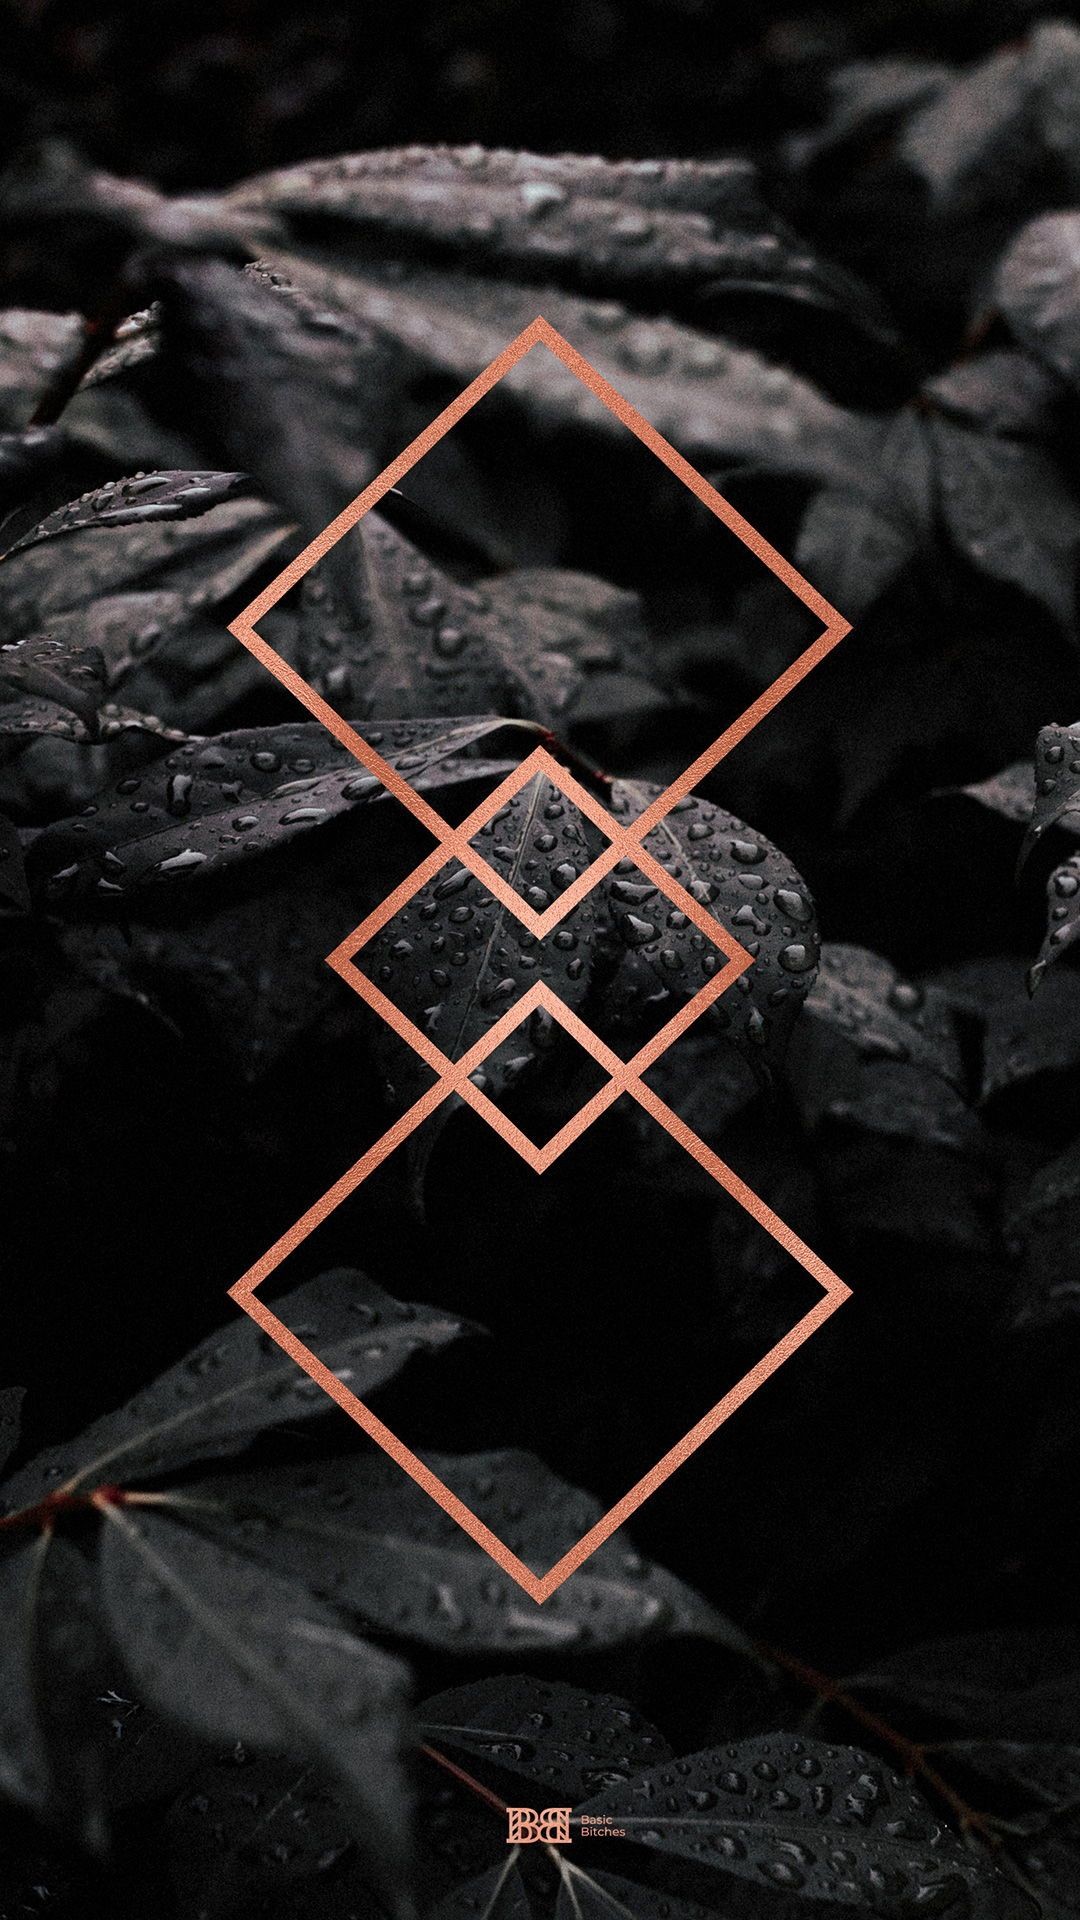 1080x1920 textured black with geometric designs - awesome sleek wallpaper for your  iphone and other smartphones - "#gothicbitch" by #basicbitches | available  for all ...